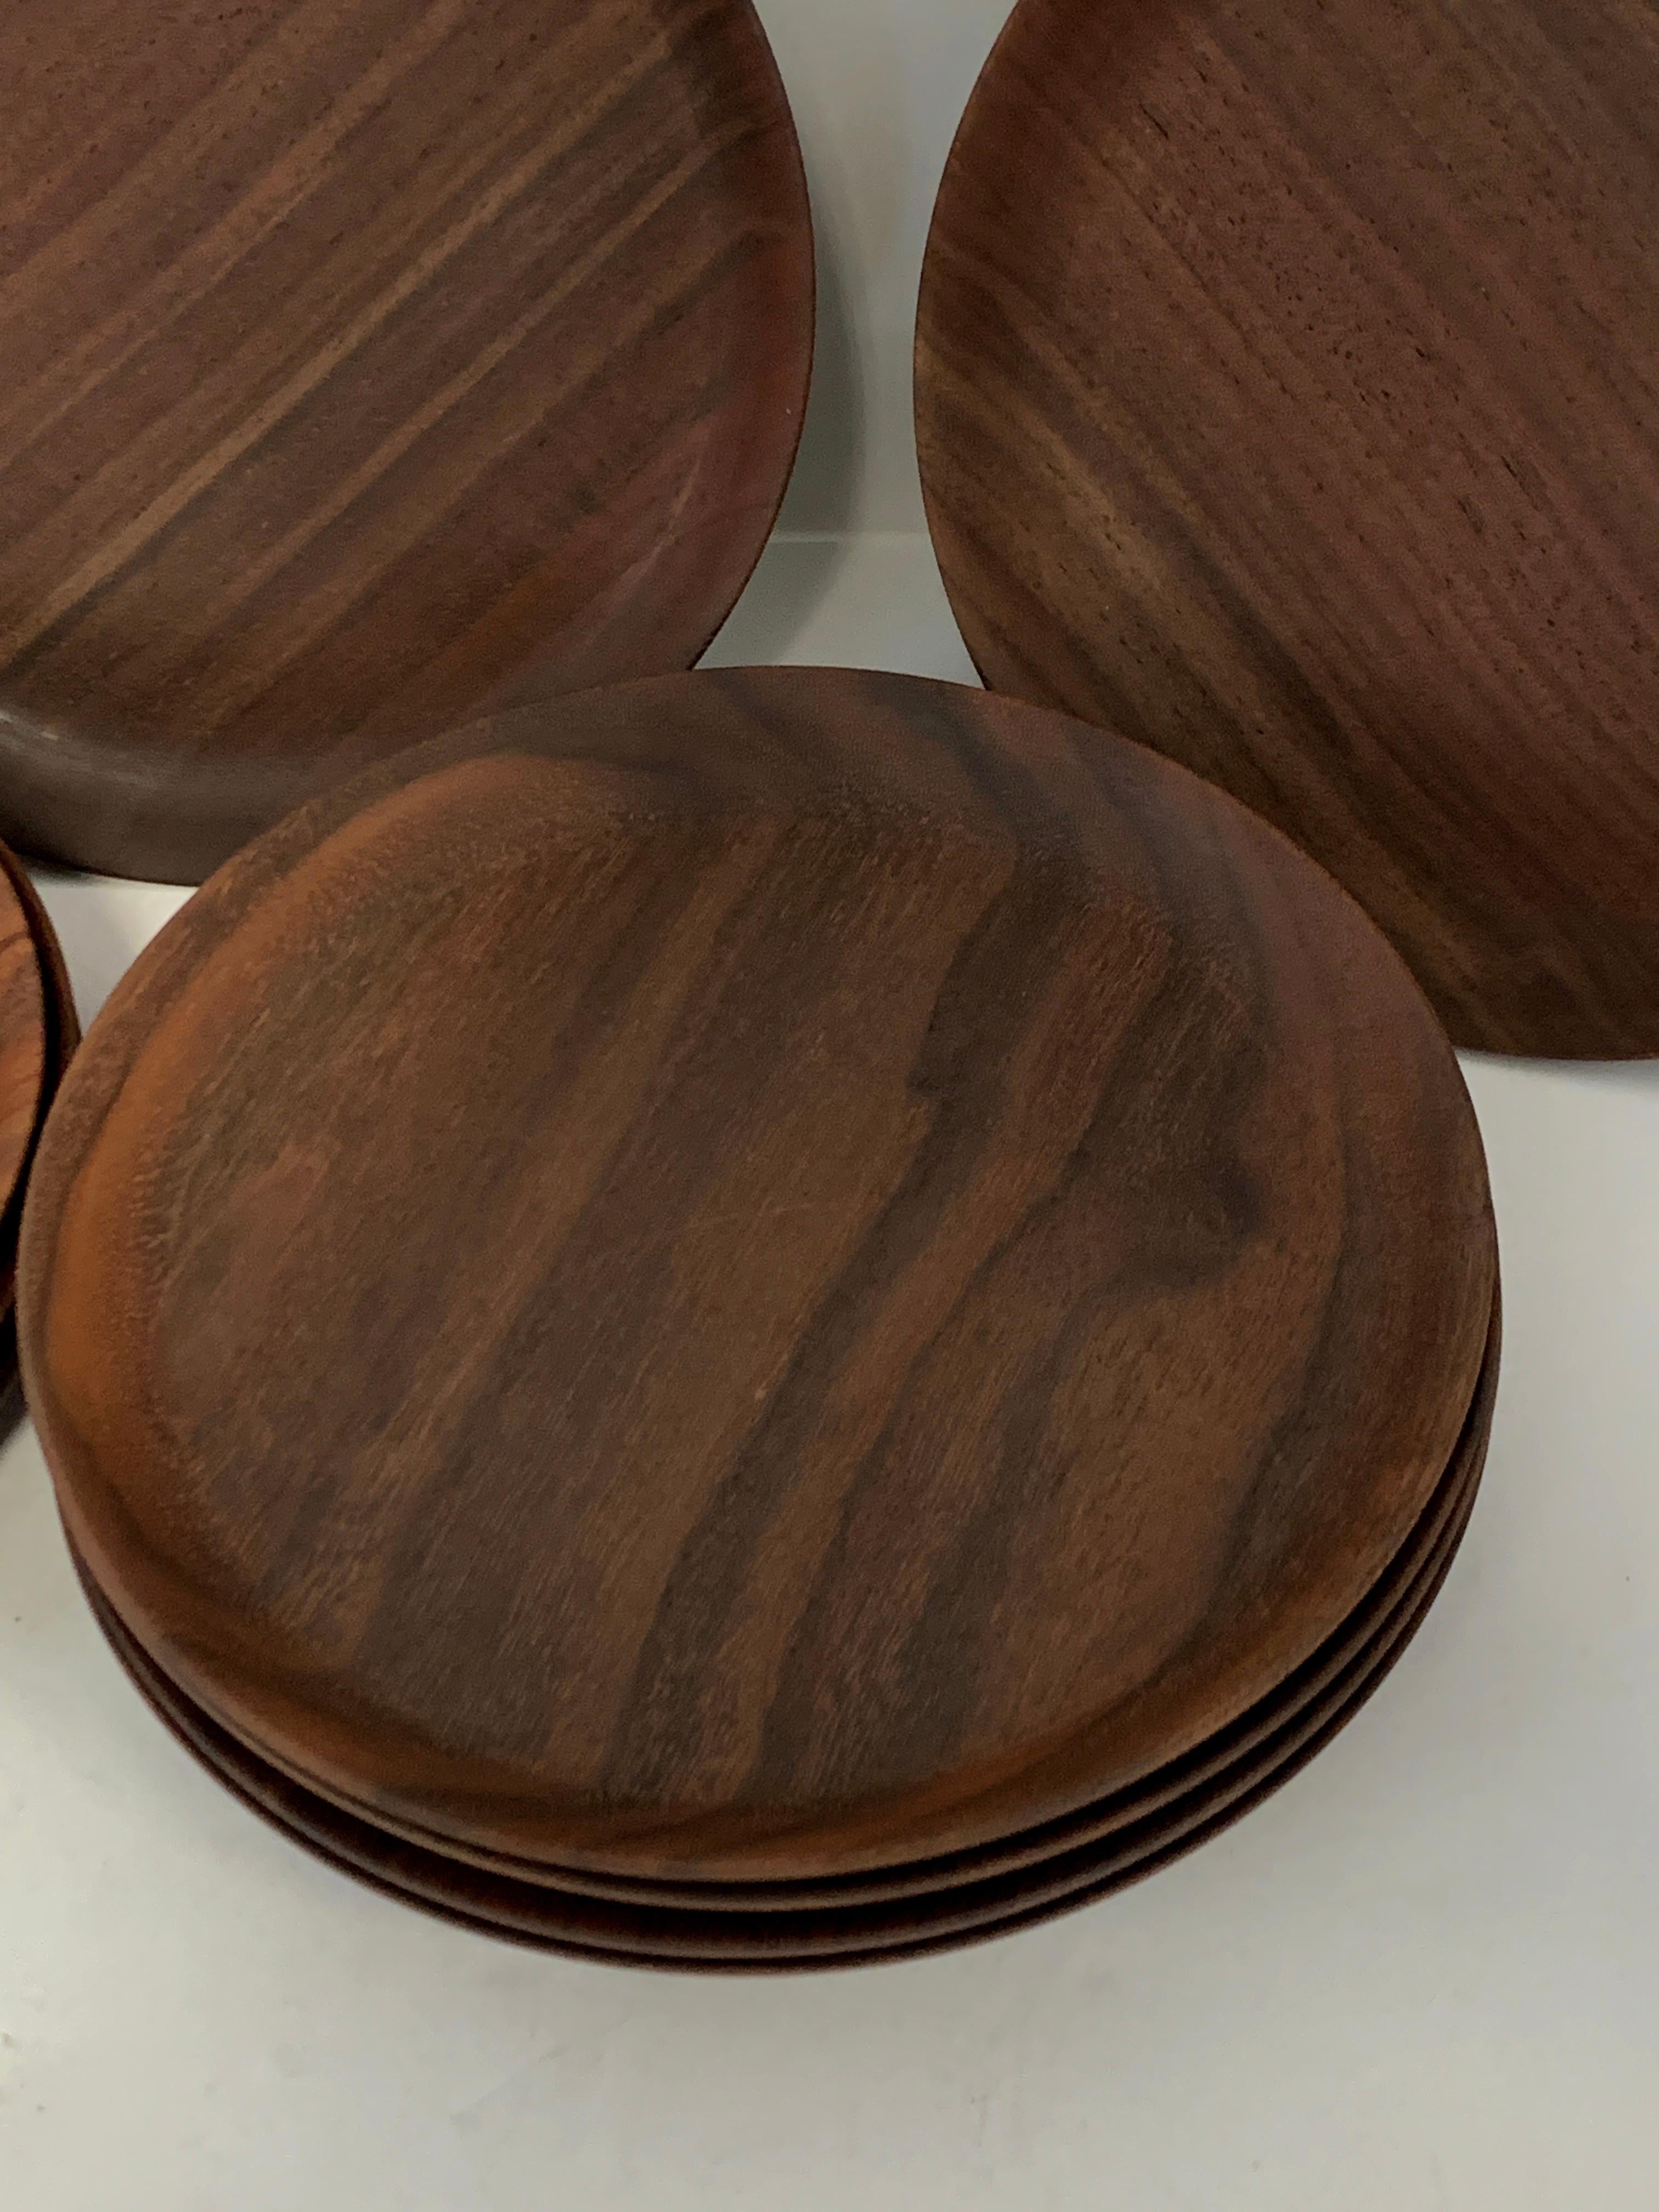 A set of 10 handmade plates in black walnut by the noted California woodworker Bob Stocksdale. They are approximate 6.75 inches in diameter and marked black walnut from California Bob Stocksdale 1985. They feature nice graining. They are in good age